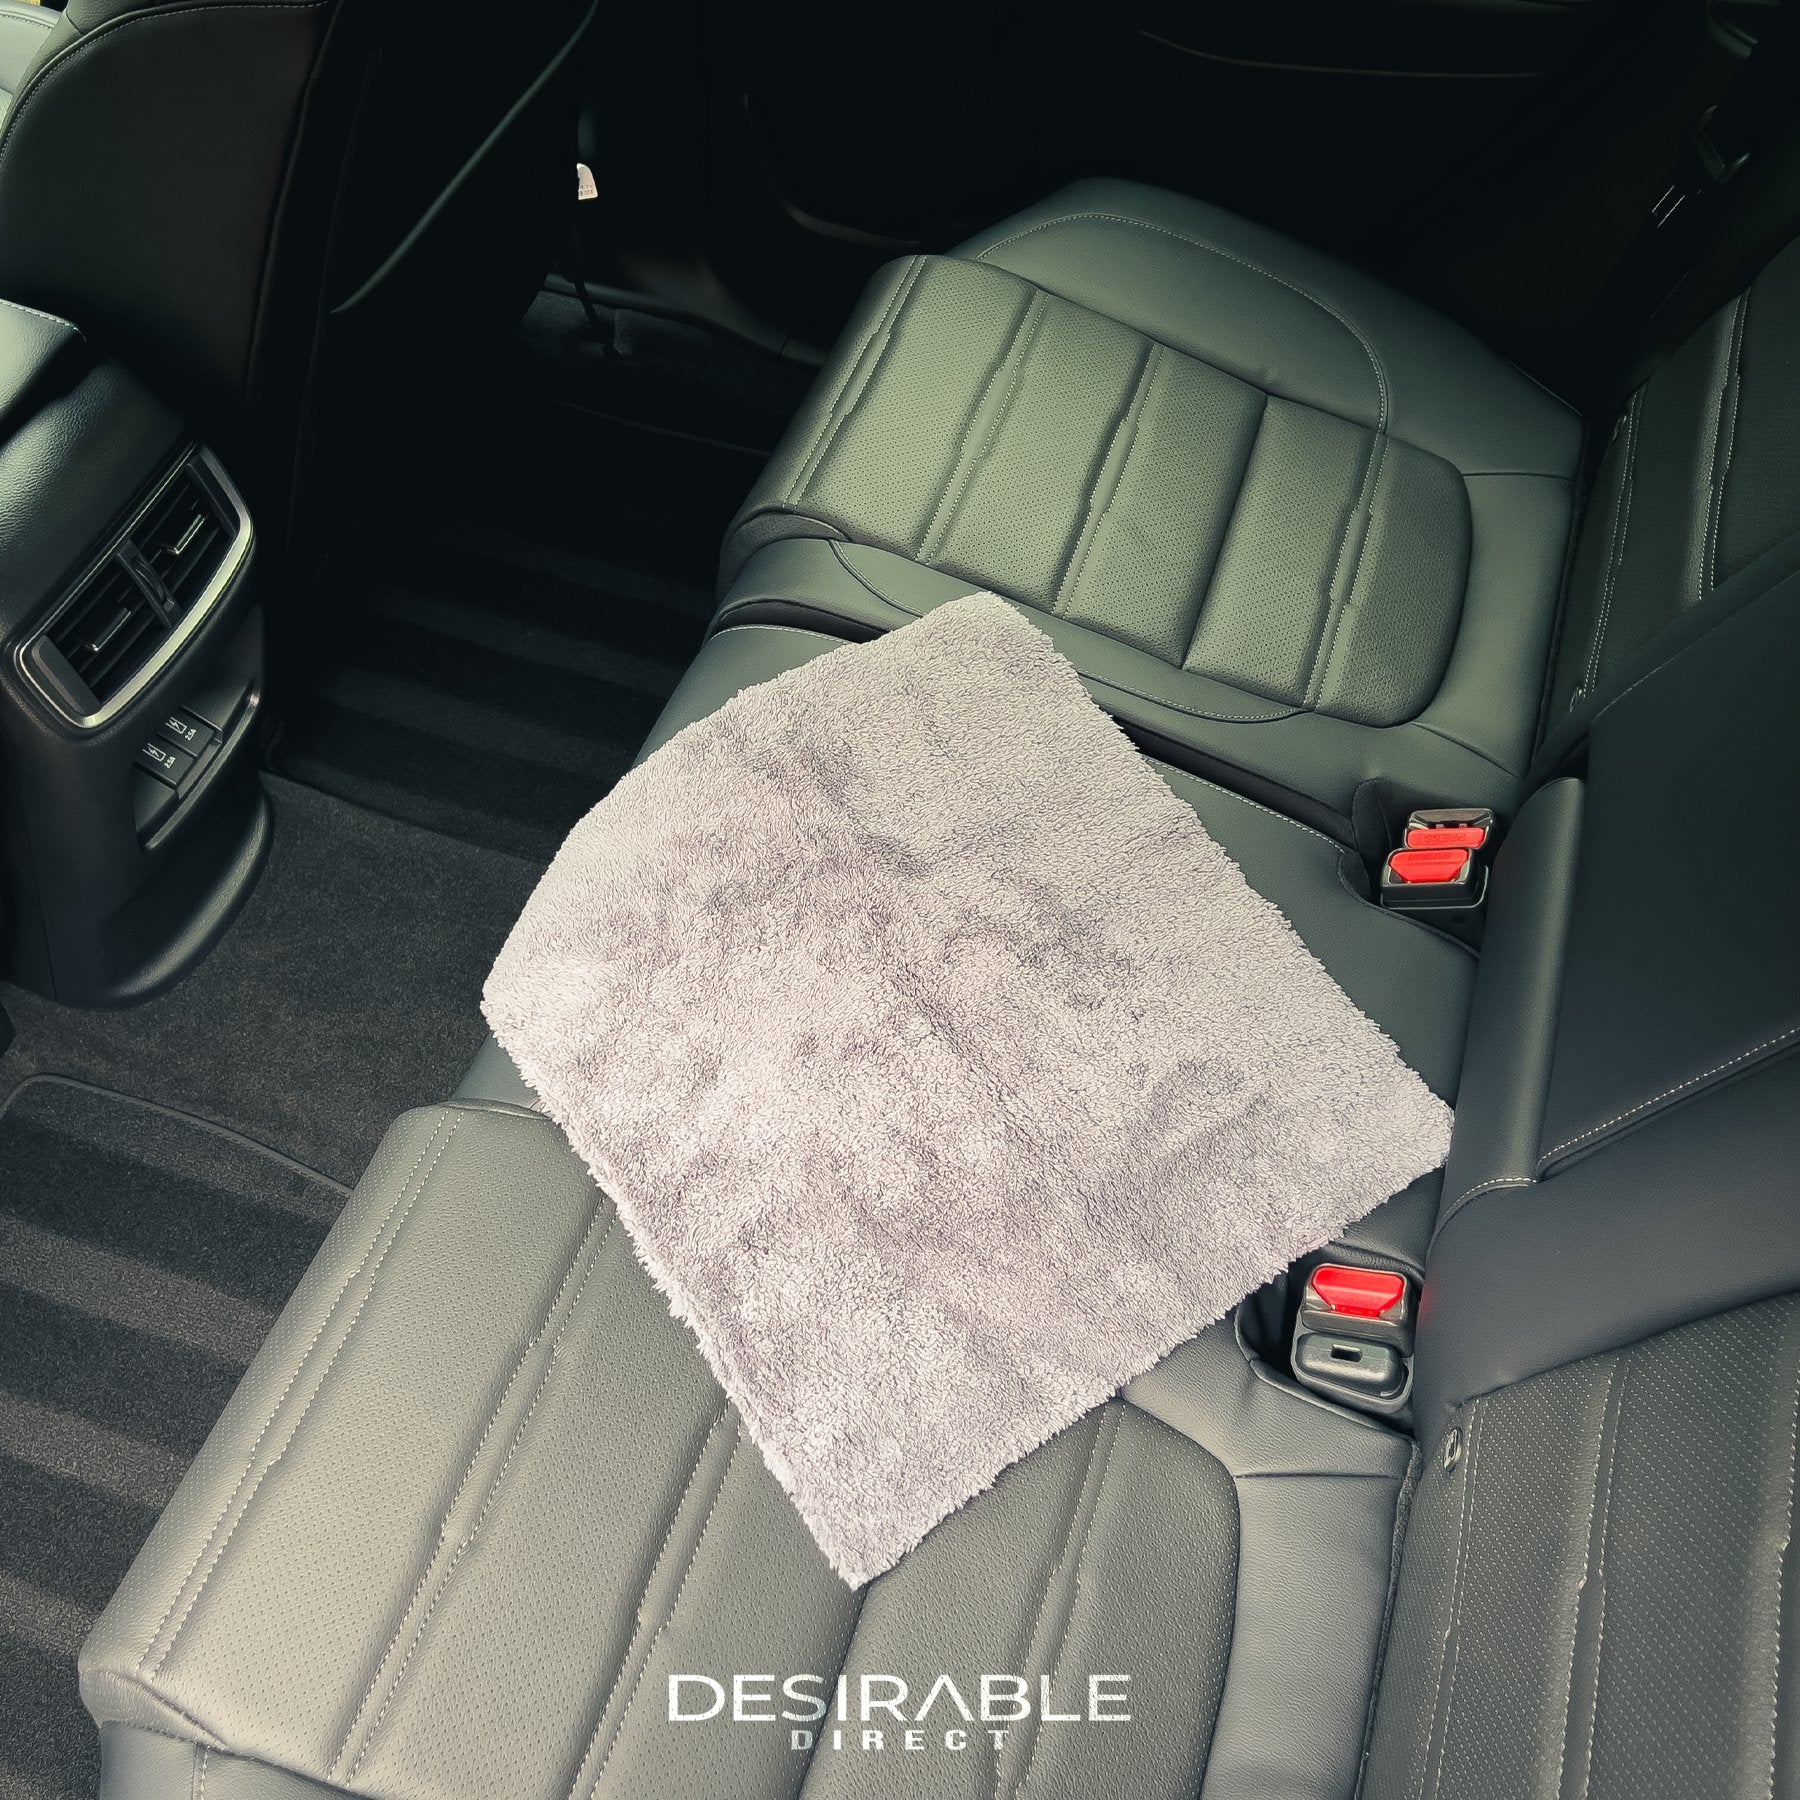 Car care microfibre plush cloth displayed on the back leather seats of a grey car.